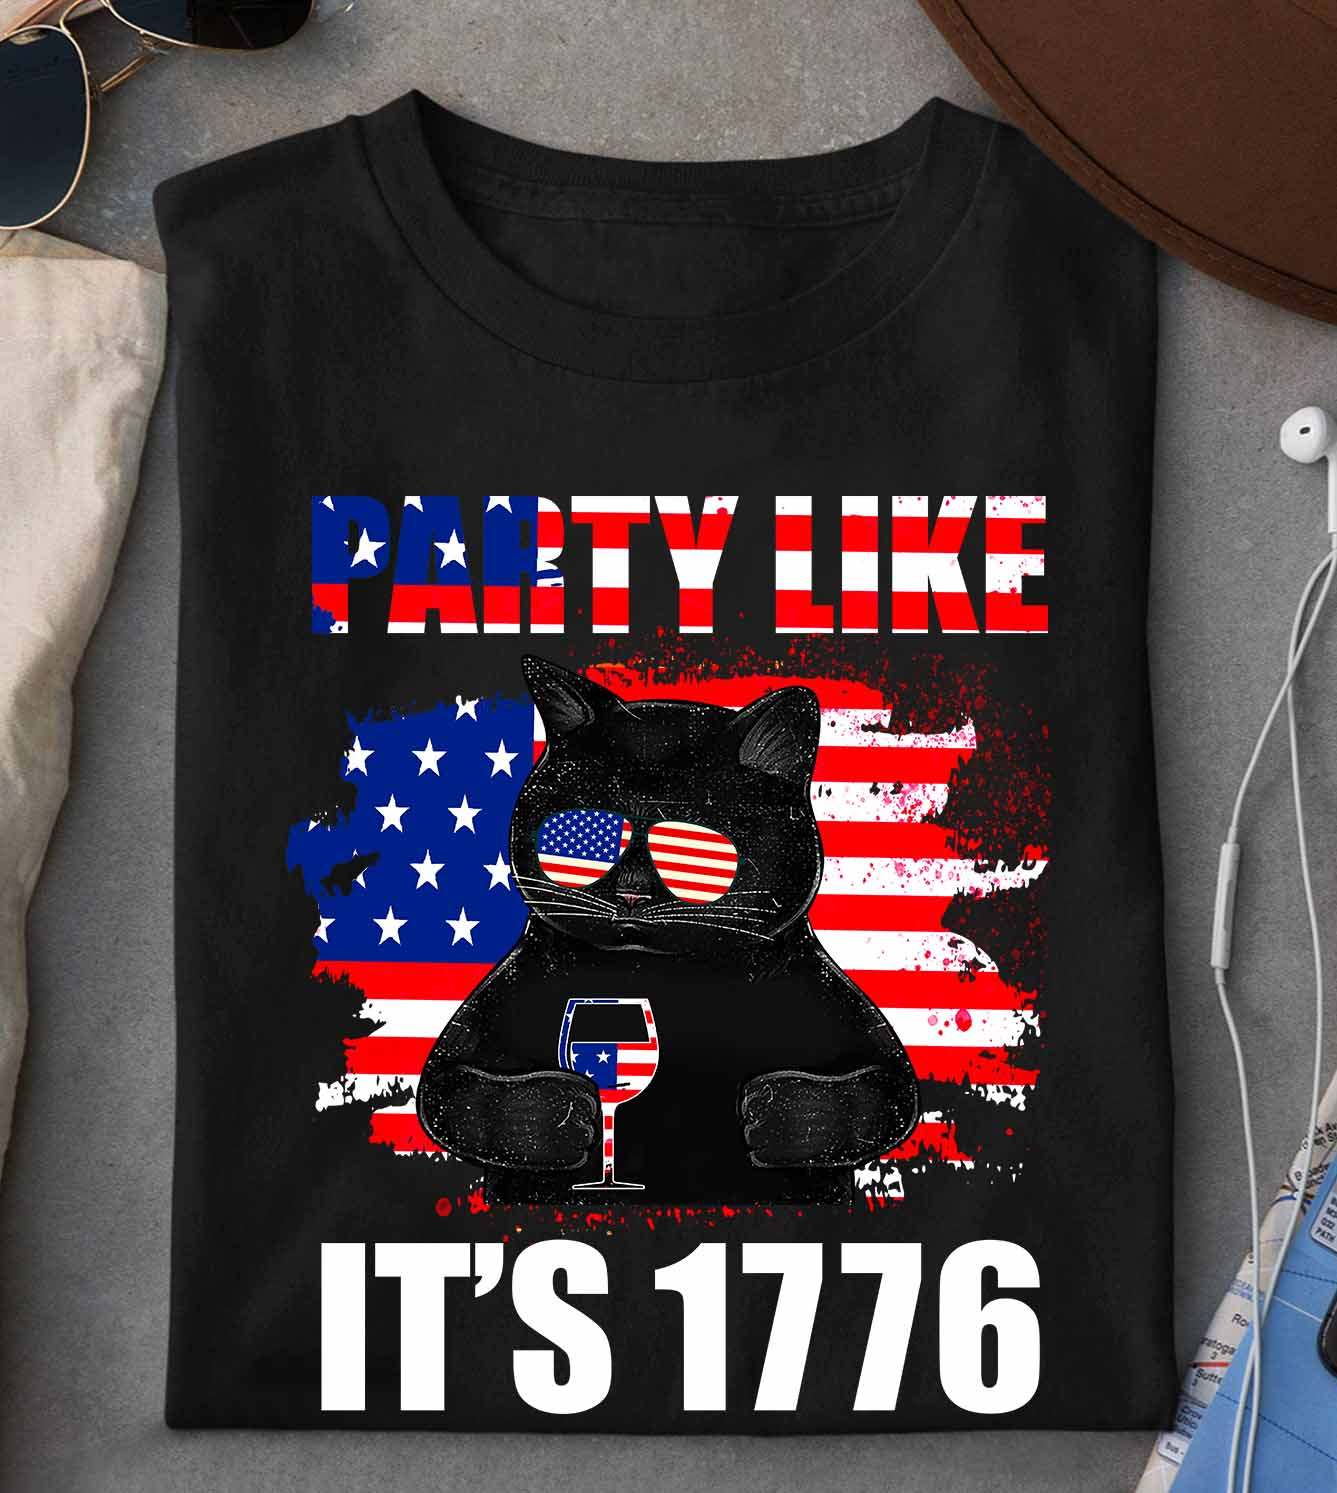 Party like it's 1776 - America independence day, black cat lover